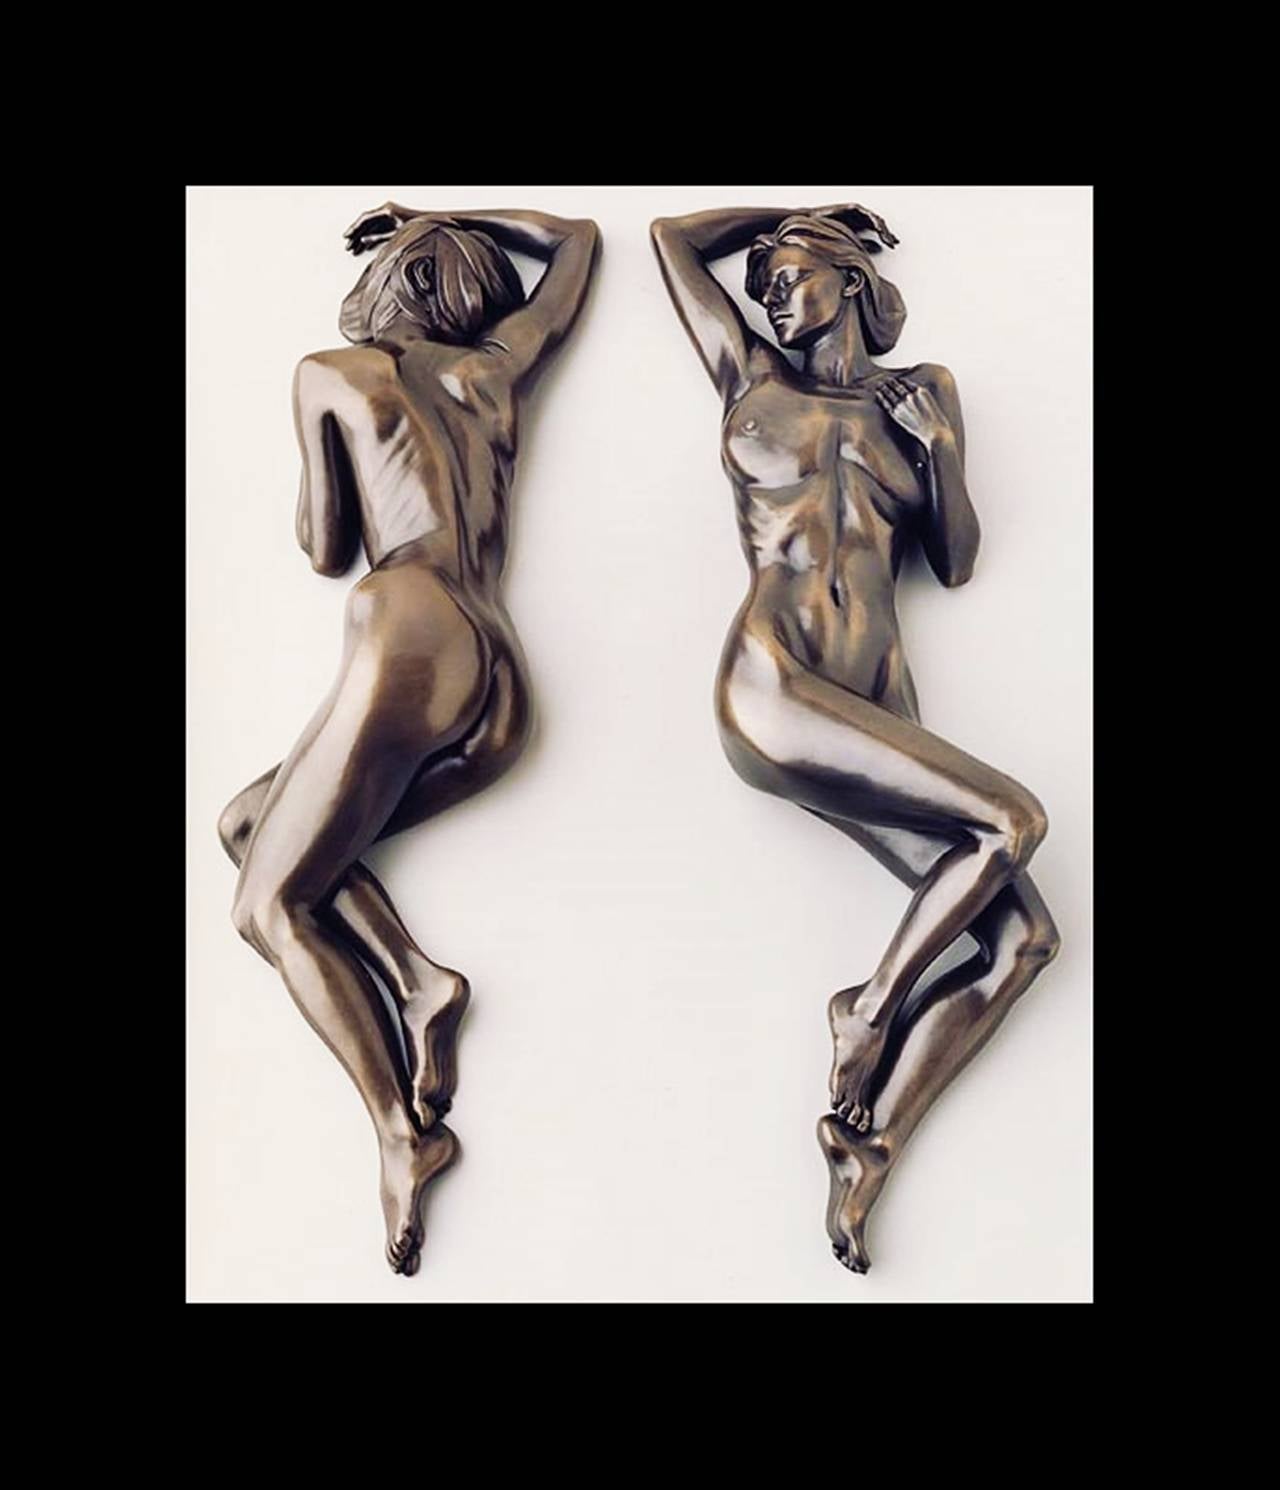 Diptych bronze sculpture by the Southern California sculpture Tanya Ragir. The sculpture is a limited edition of 9 and this set is #4/9 executed in bronze and it comes signed, dated and numbered by the artist.

Measurements: 6